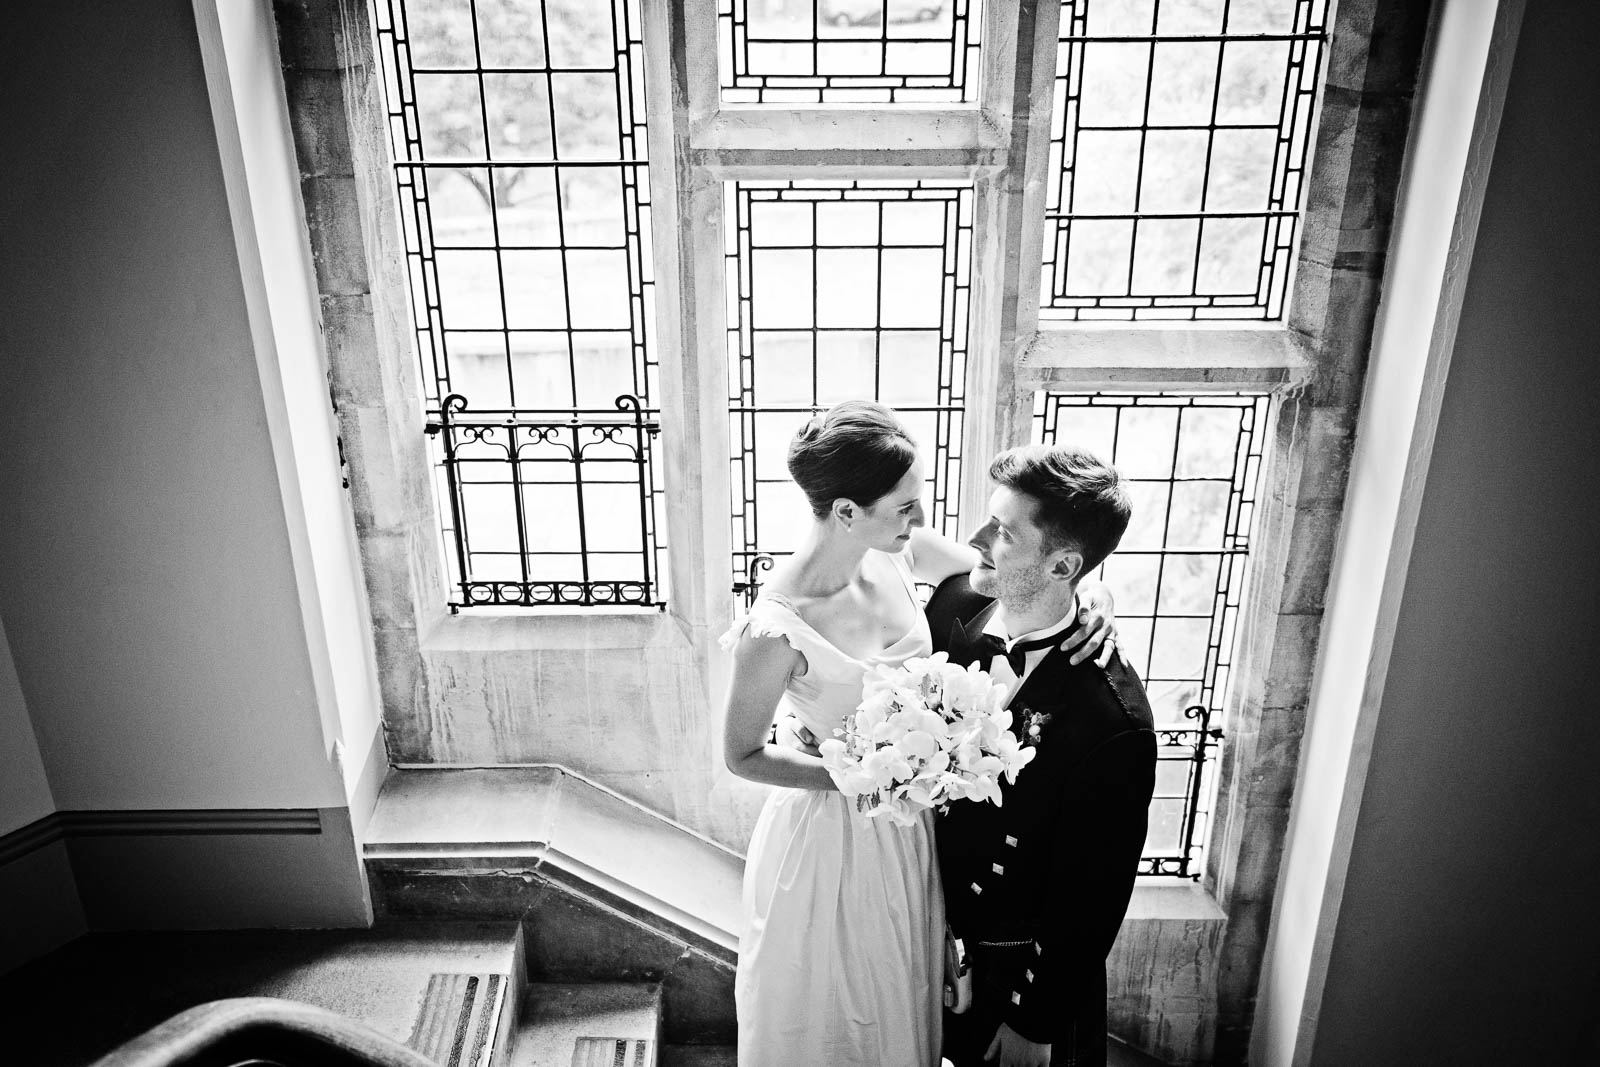 Black & white photograph of Bride & Groom standing (facing each other), with a stain glass window behind them.  